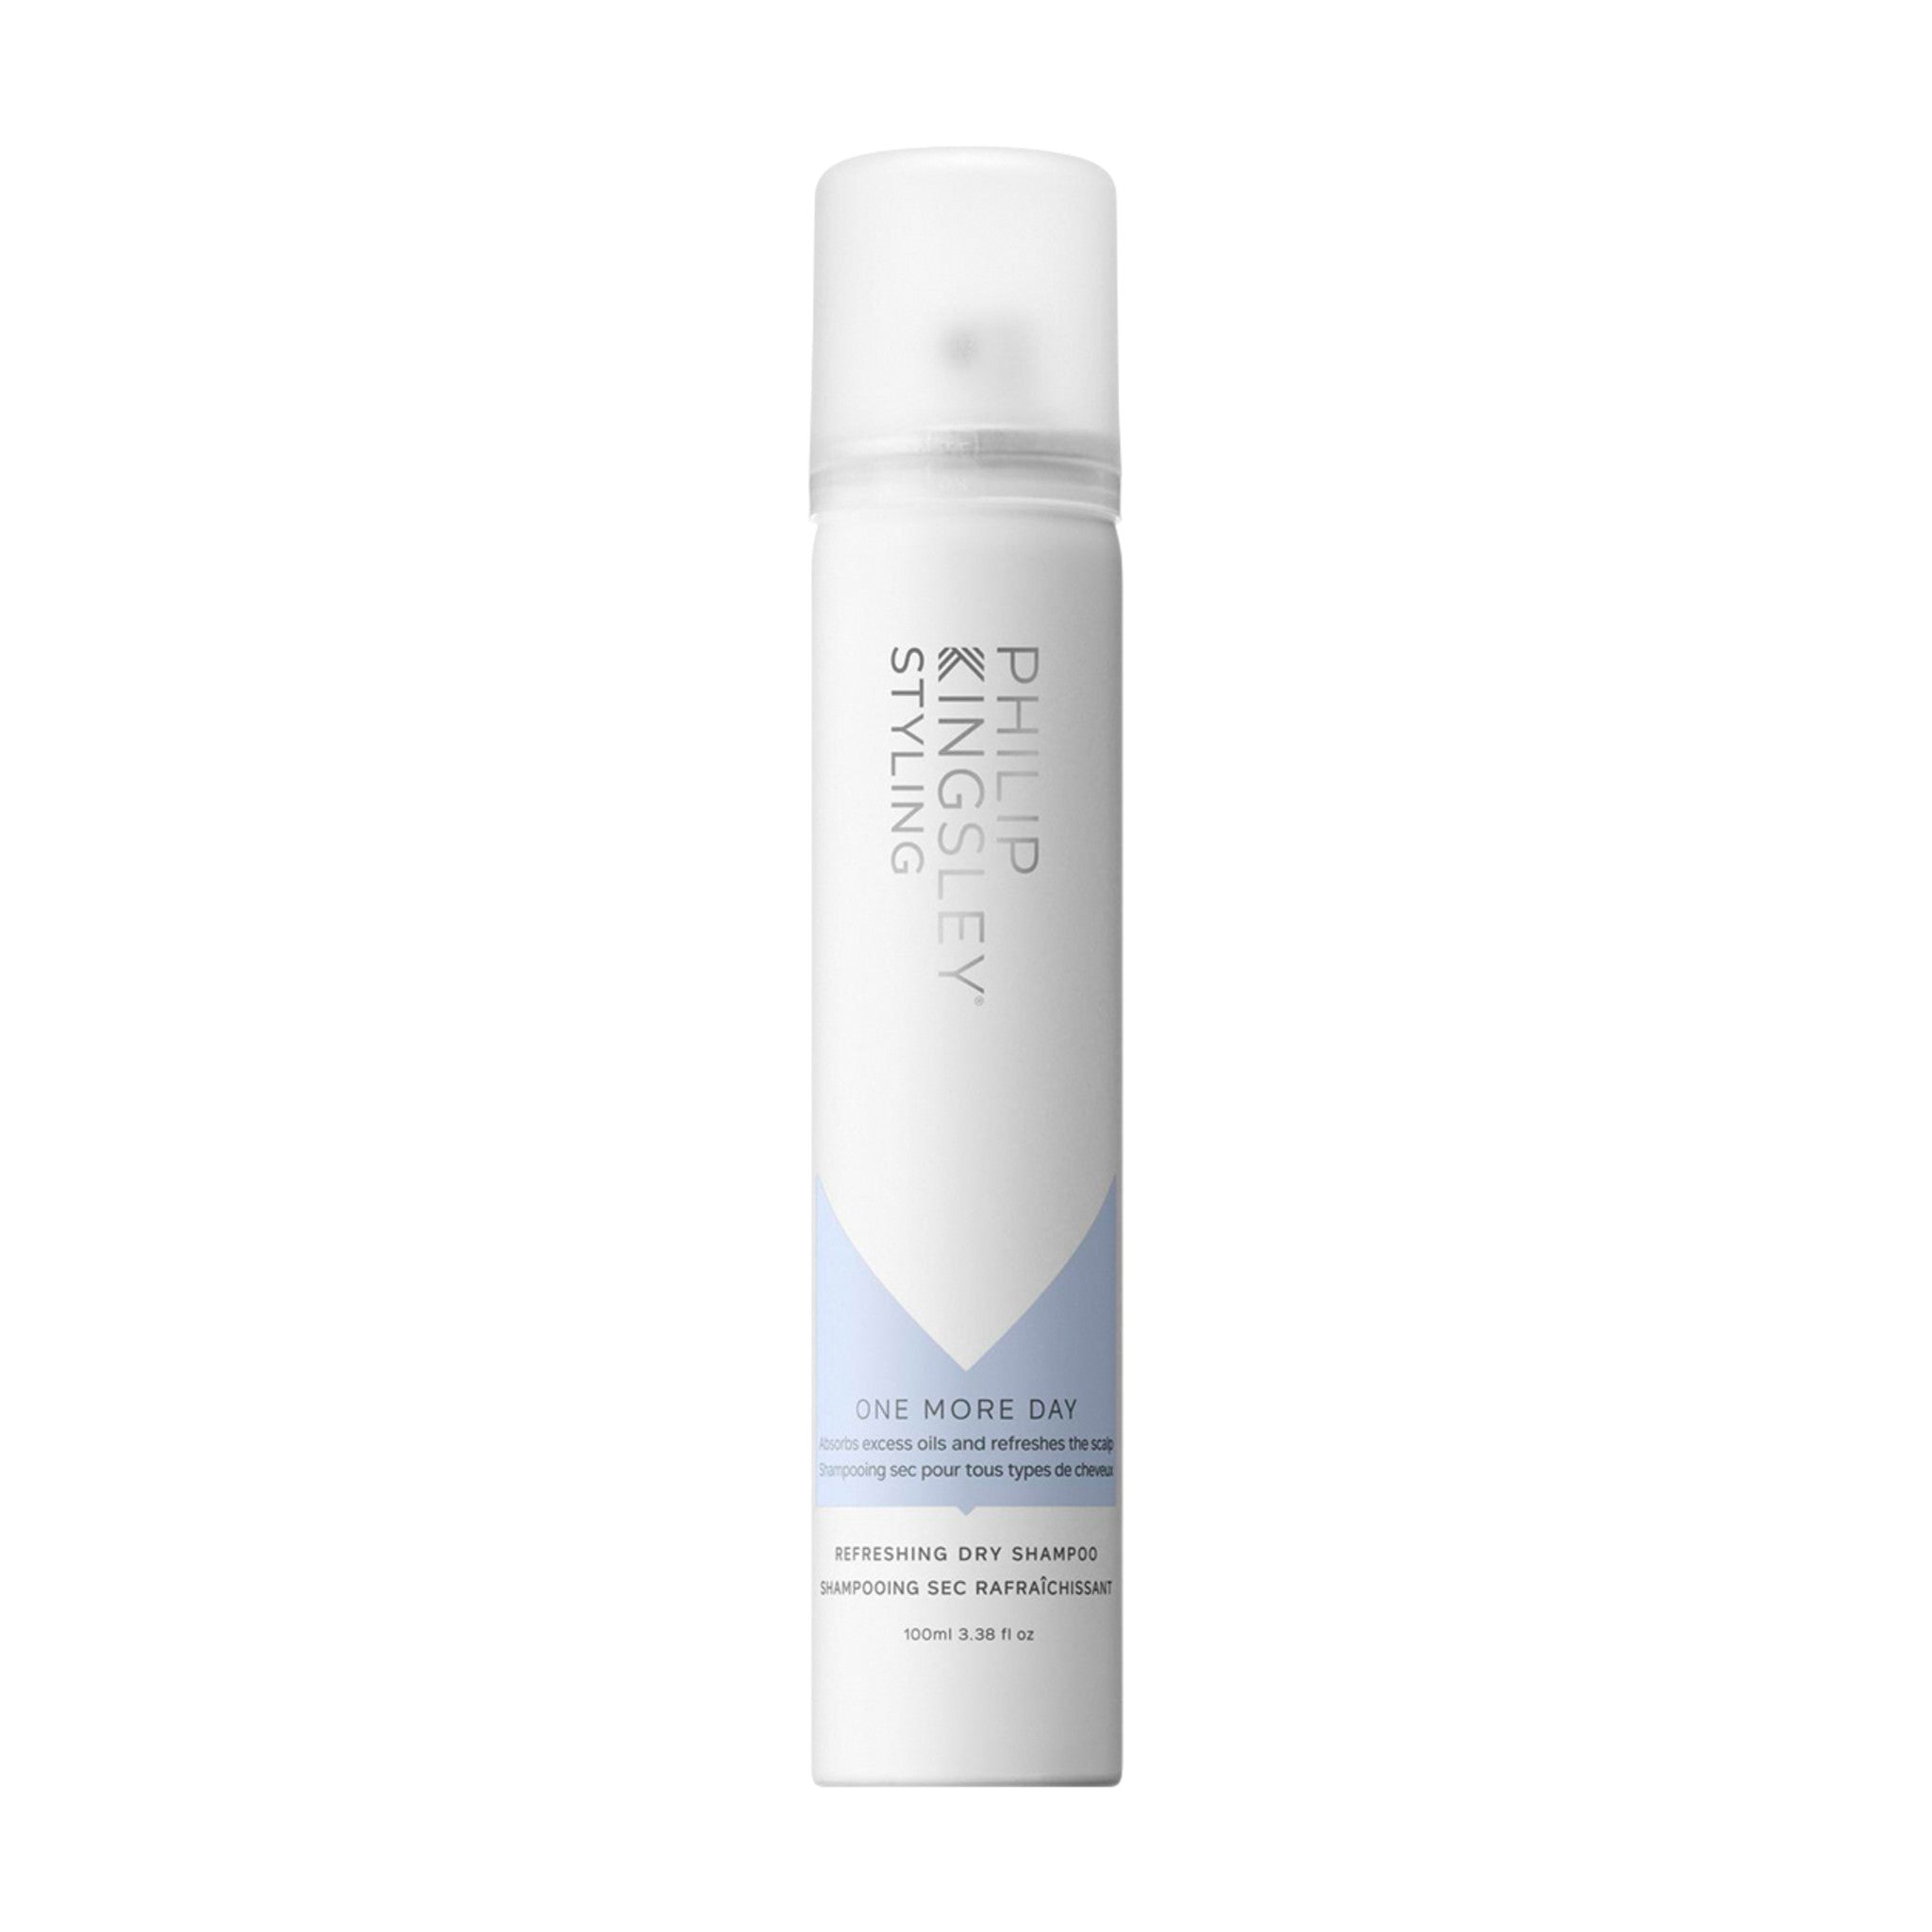 Philip Kingsley One More Day Refreshing Dry Shampoo Size variant: 100ml main image.